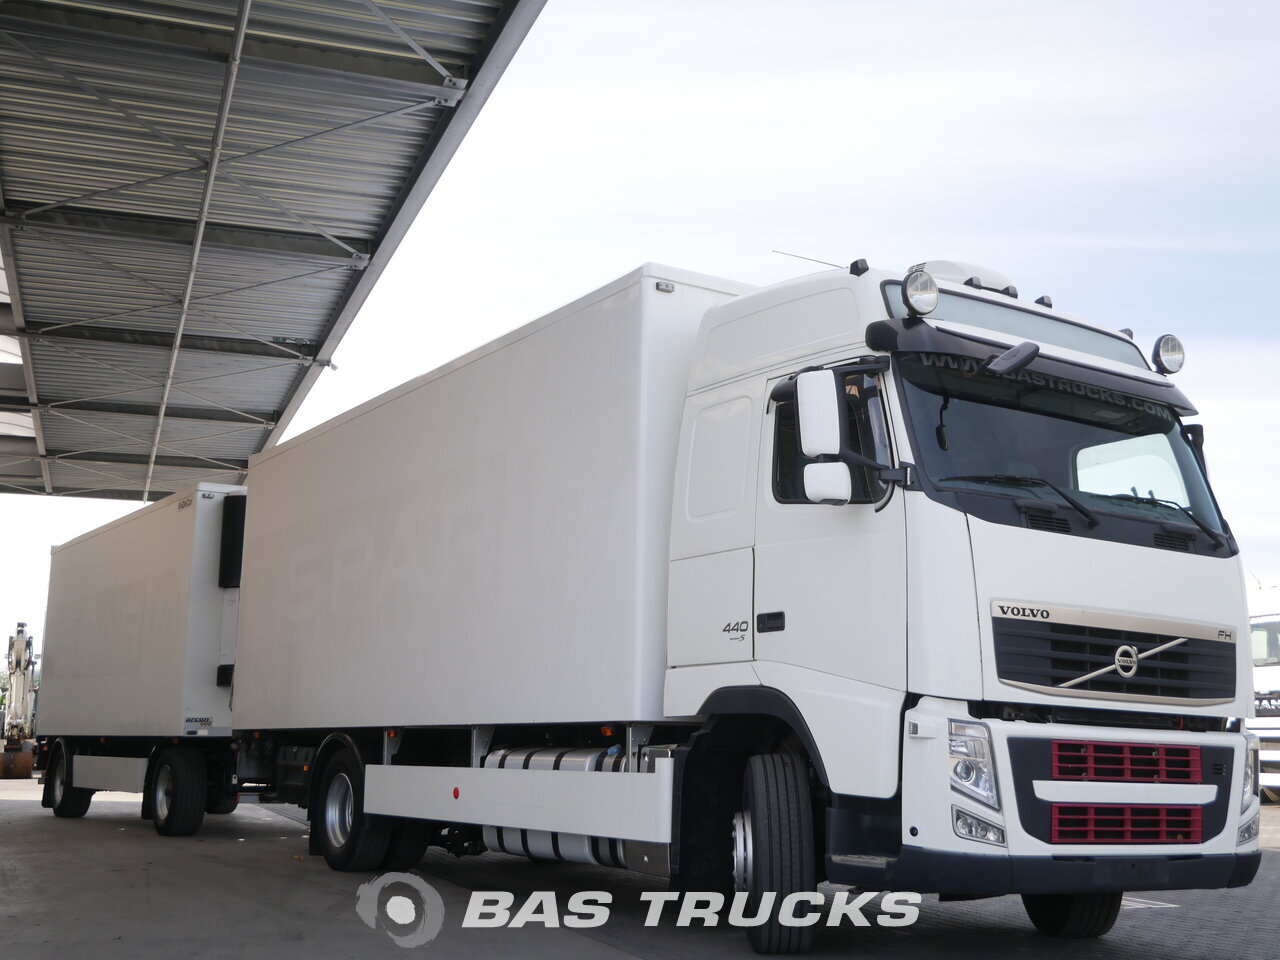 For Sale At Bas Trucks Volvo Fh 440 4x2 03 2009